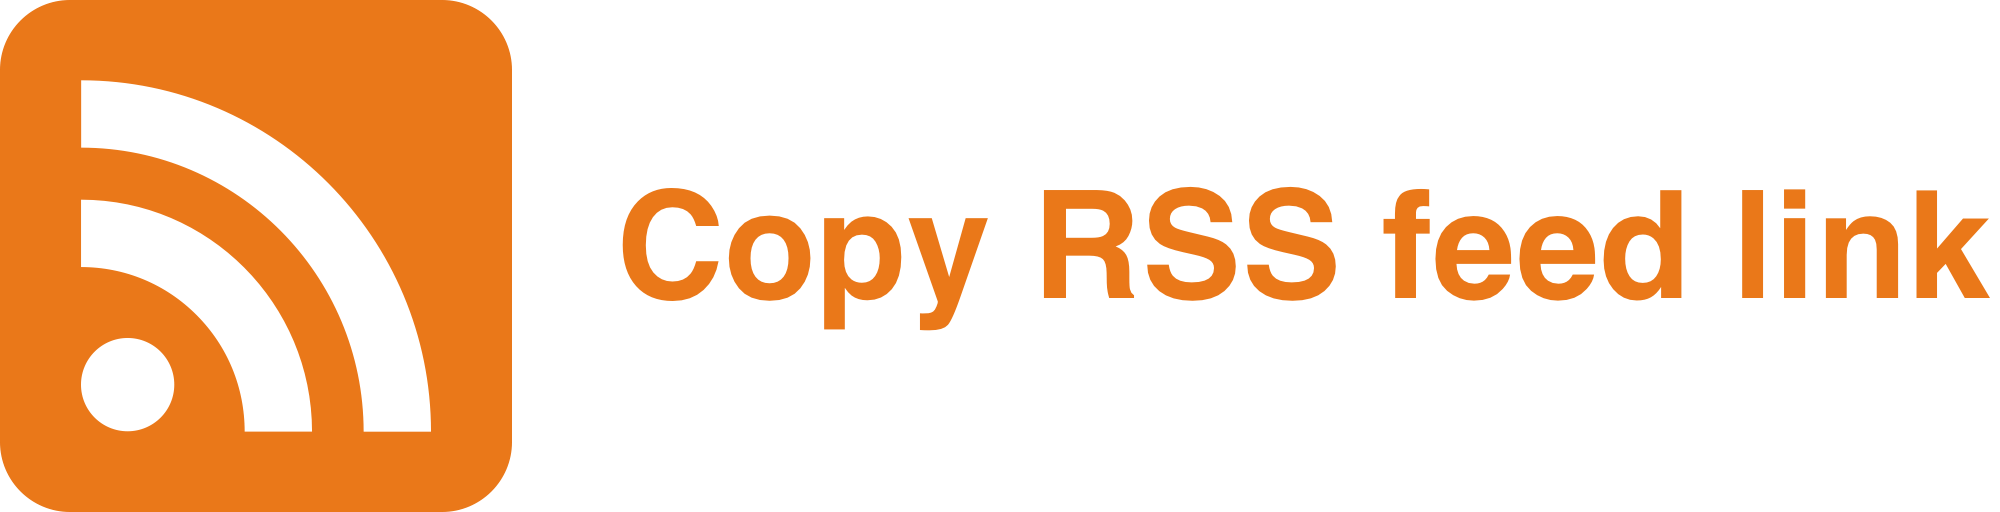 Copy RSS Feed Link